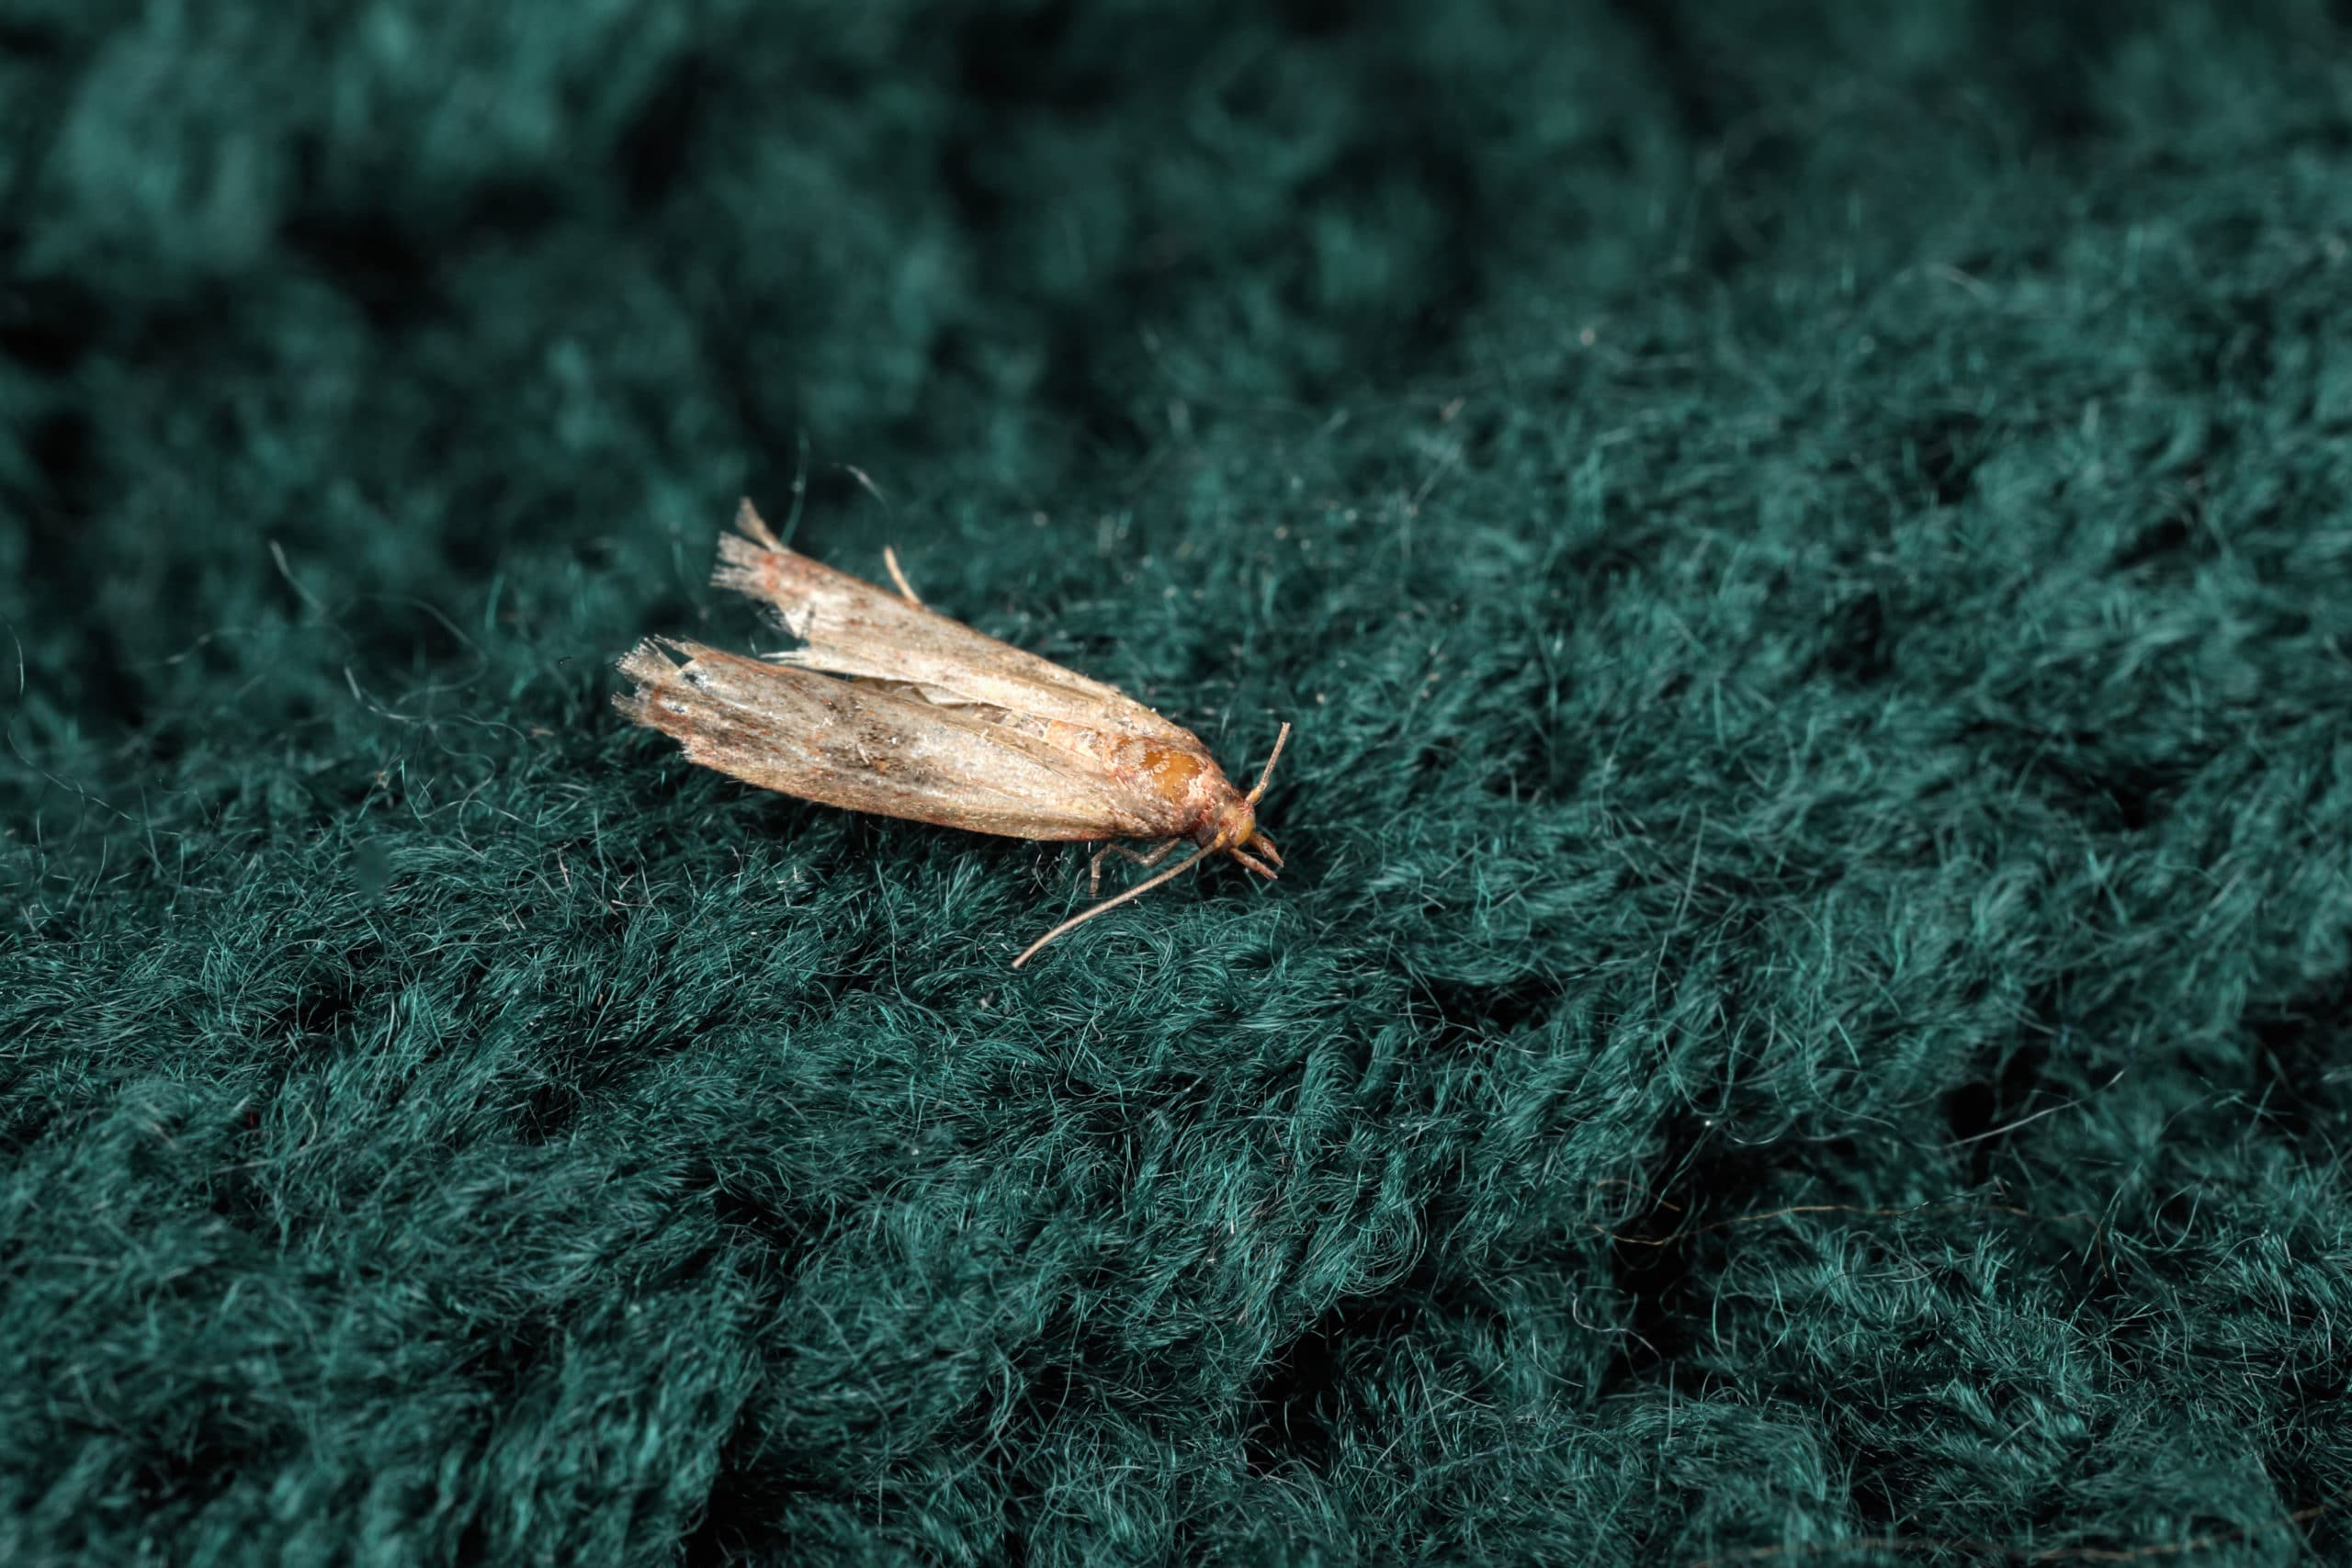 Common clothes moth (Tineola bisselliella) on green knitted fabric